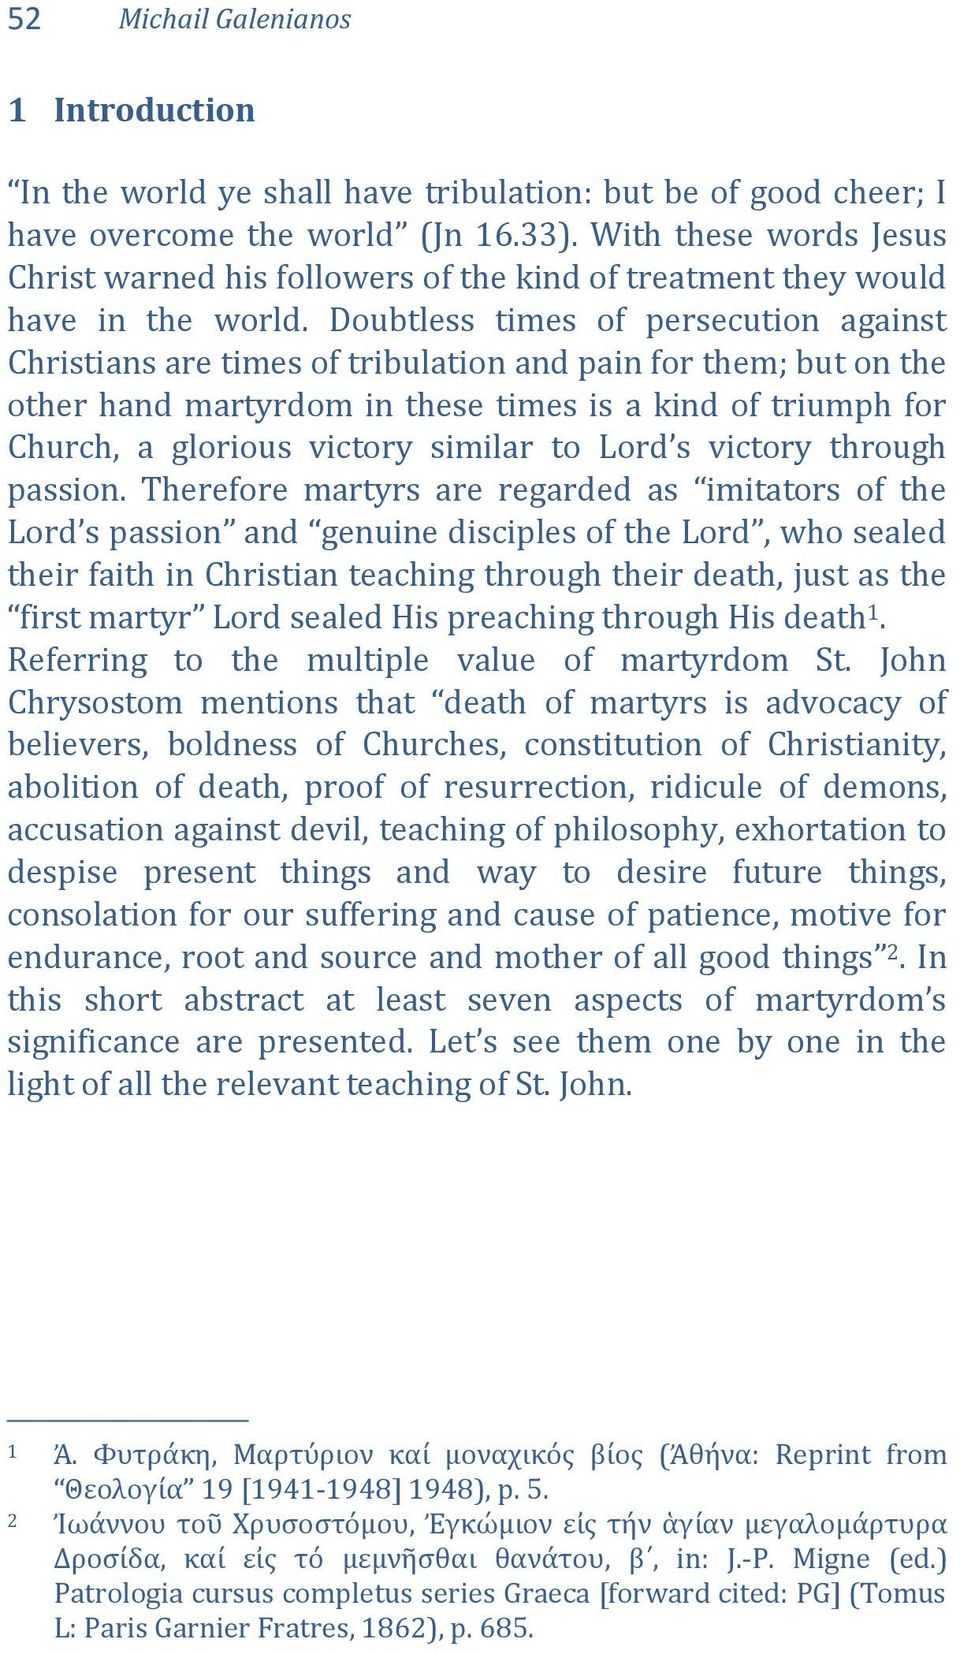 Doubtless times of persecution against Christians are times of tribulation and pain for them; but on the other hand martyrdom in these times is a kind of triumph for Church, a glorious victory